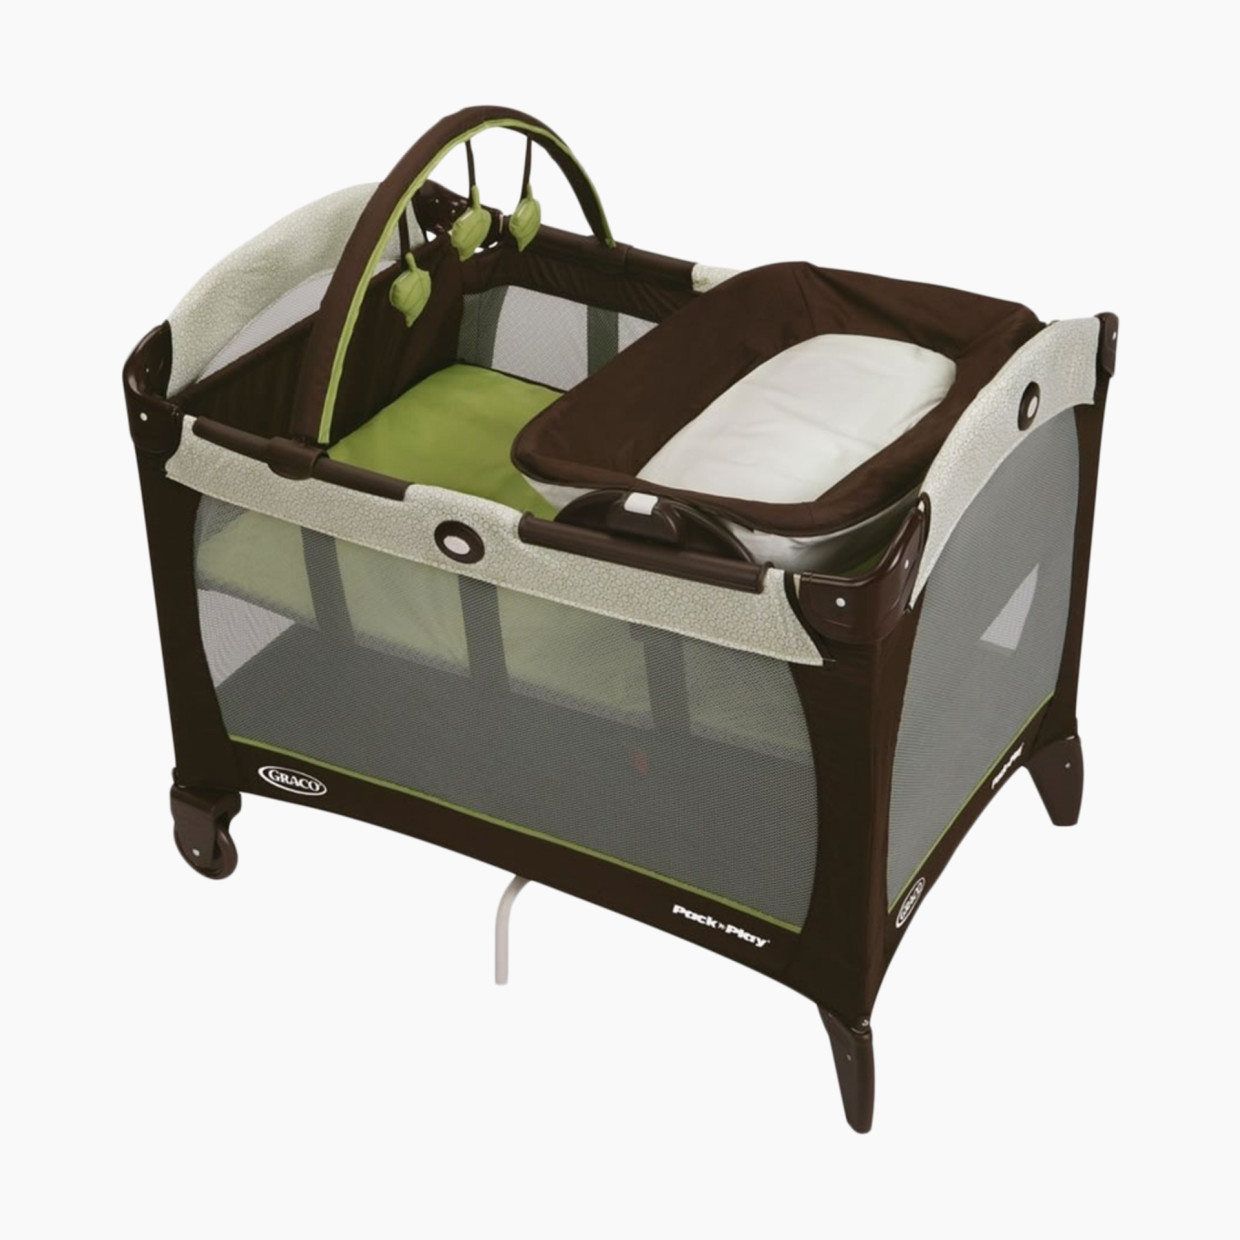 Graco Pack n' Play Reversible Napper and Changer Playard - Go Green.